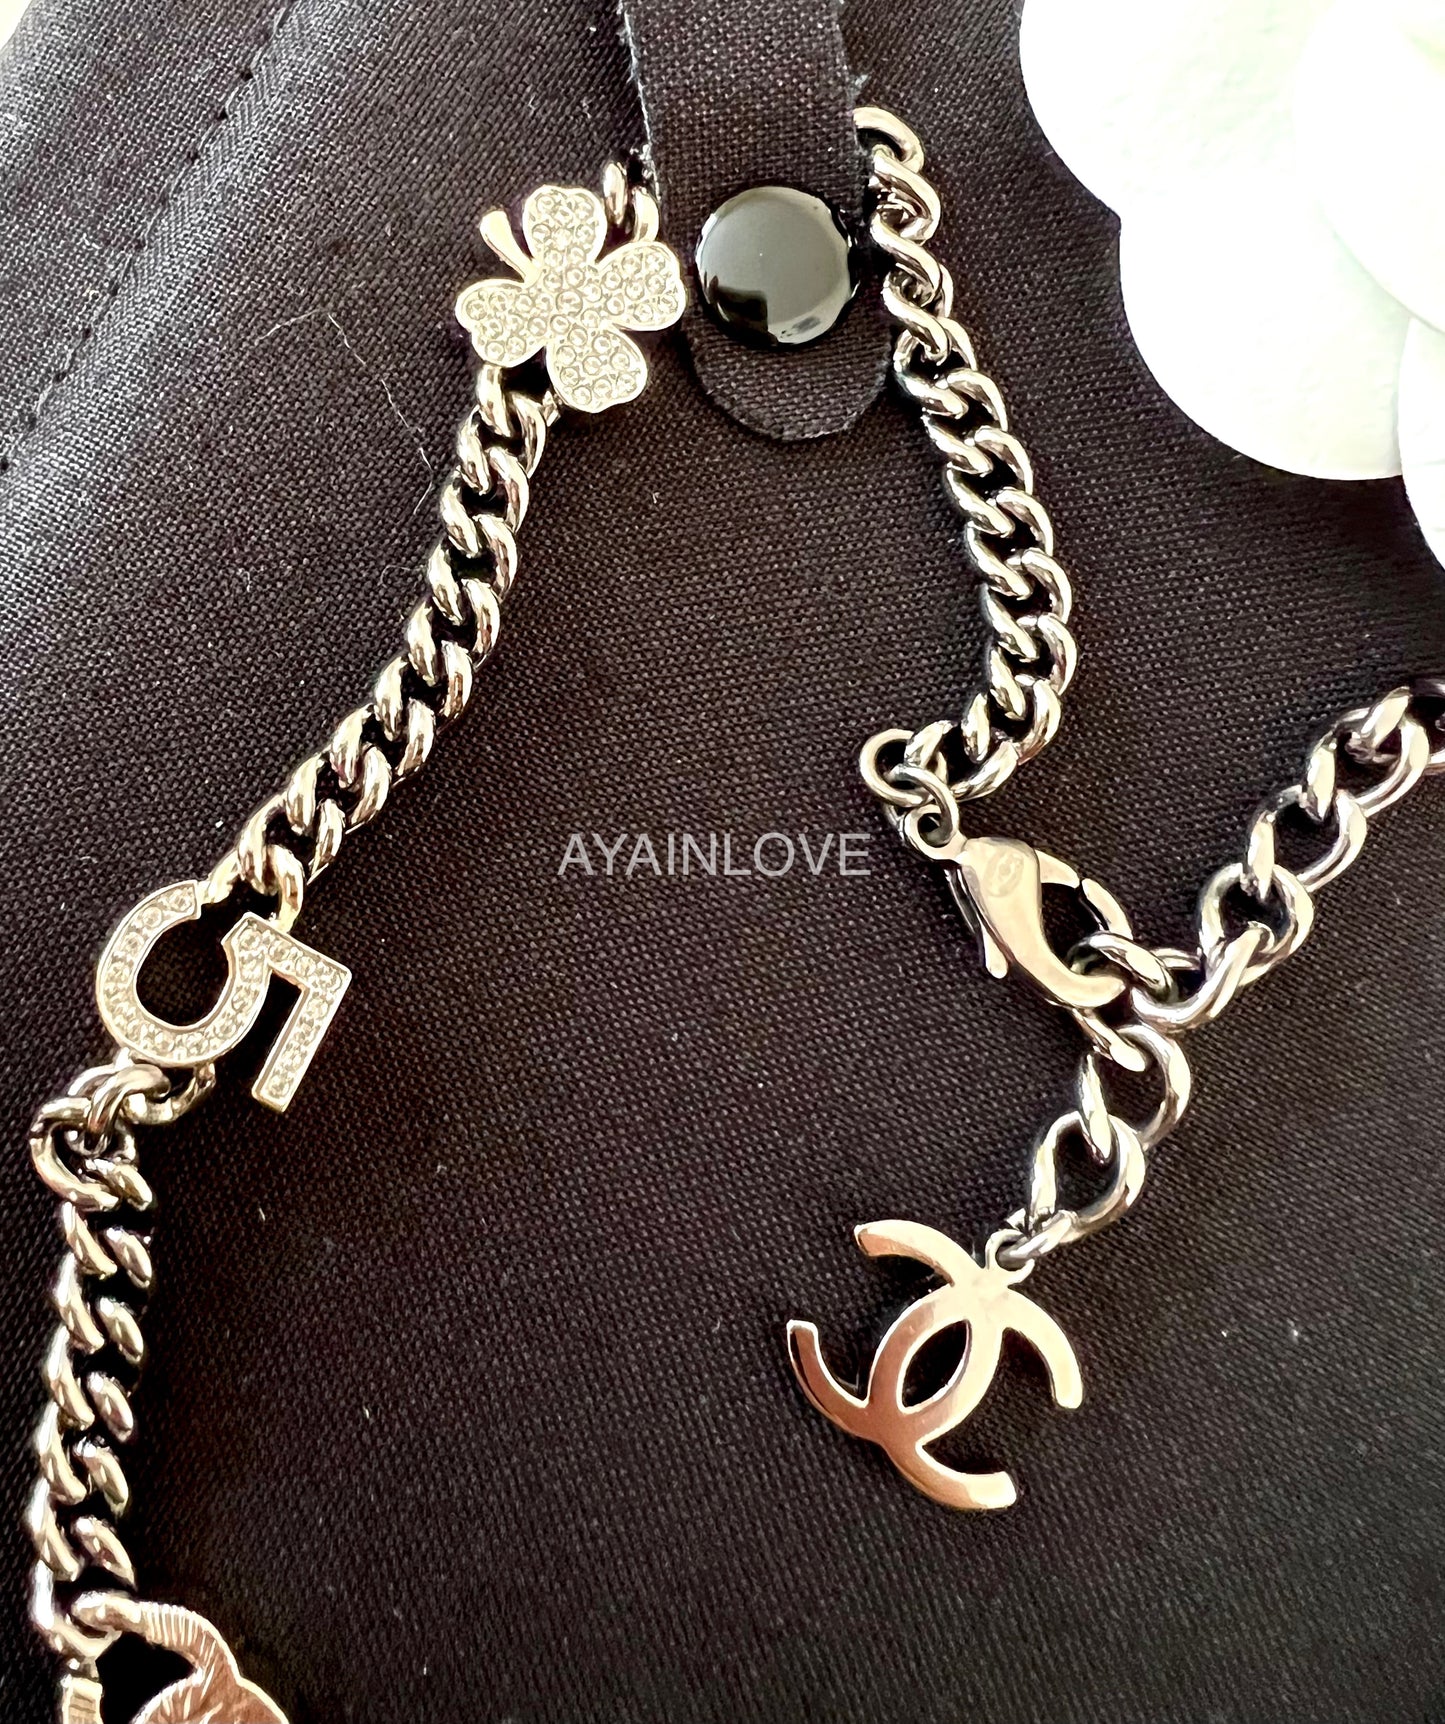 CHANEL 5 Charms Chain Necklace Shiny Ruthenium Hardware